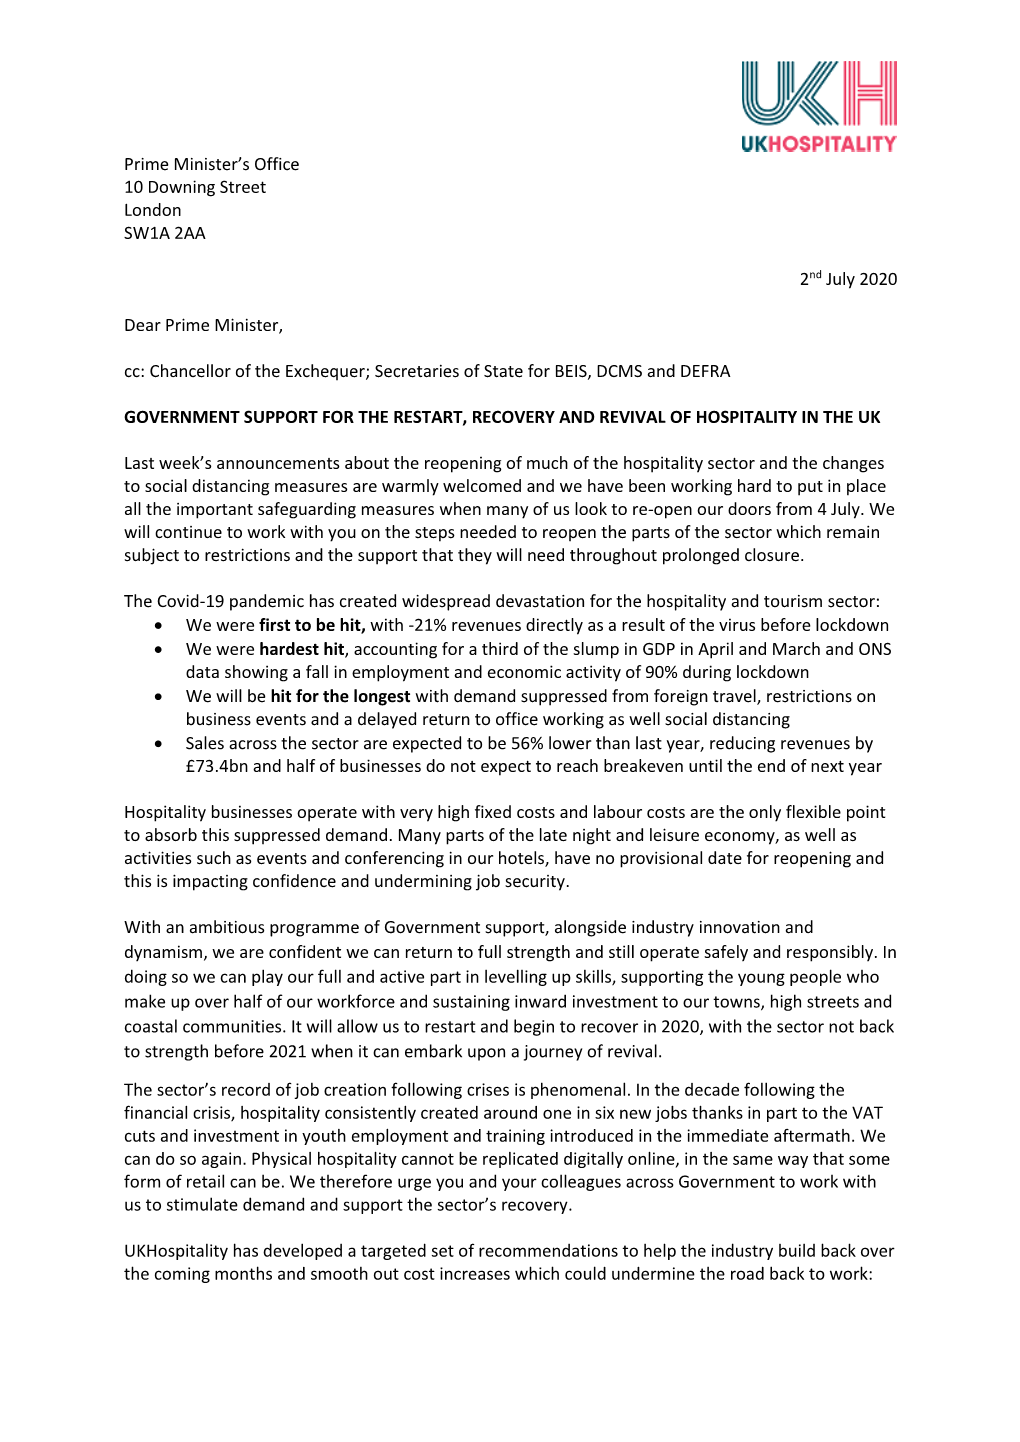 Ukhospitality Letter to the Prime Minister